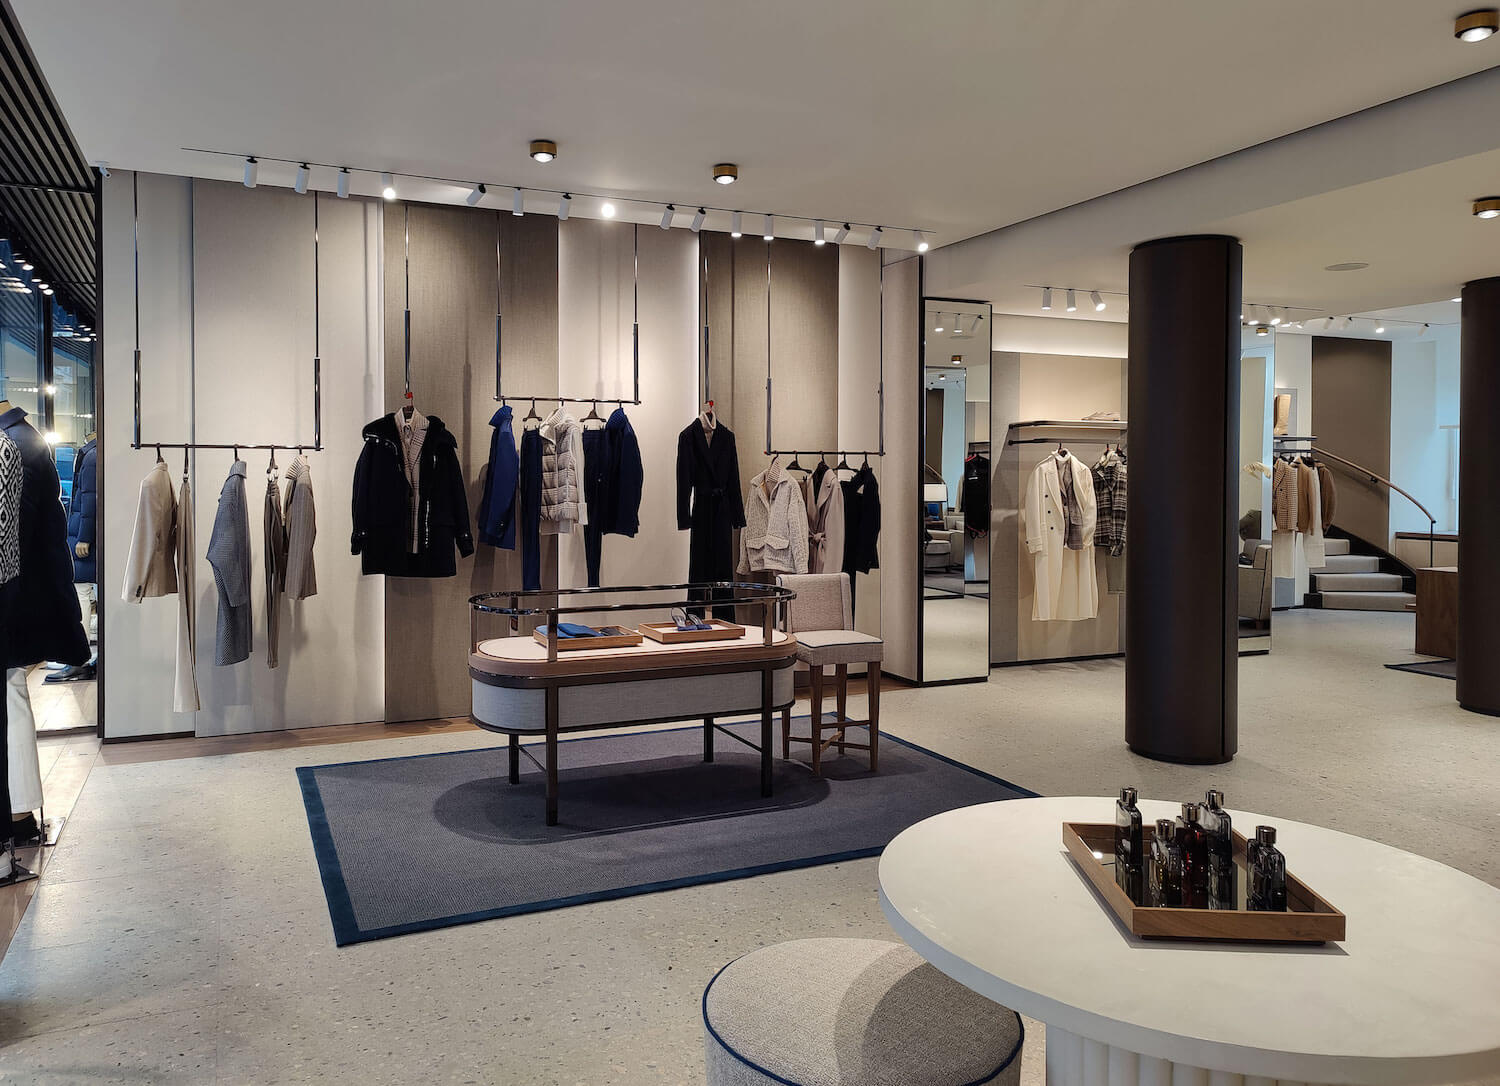 Studio B+Architects has redesigned the K|Store